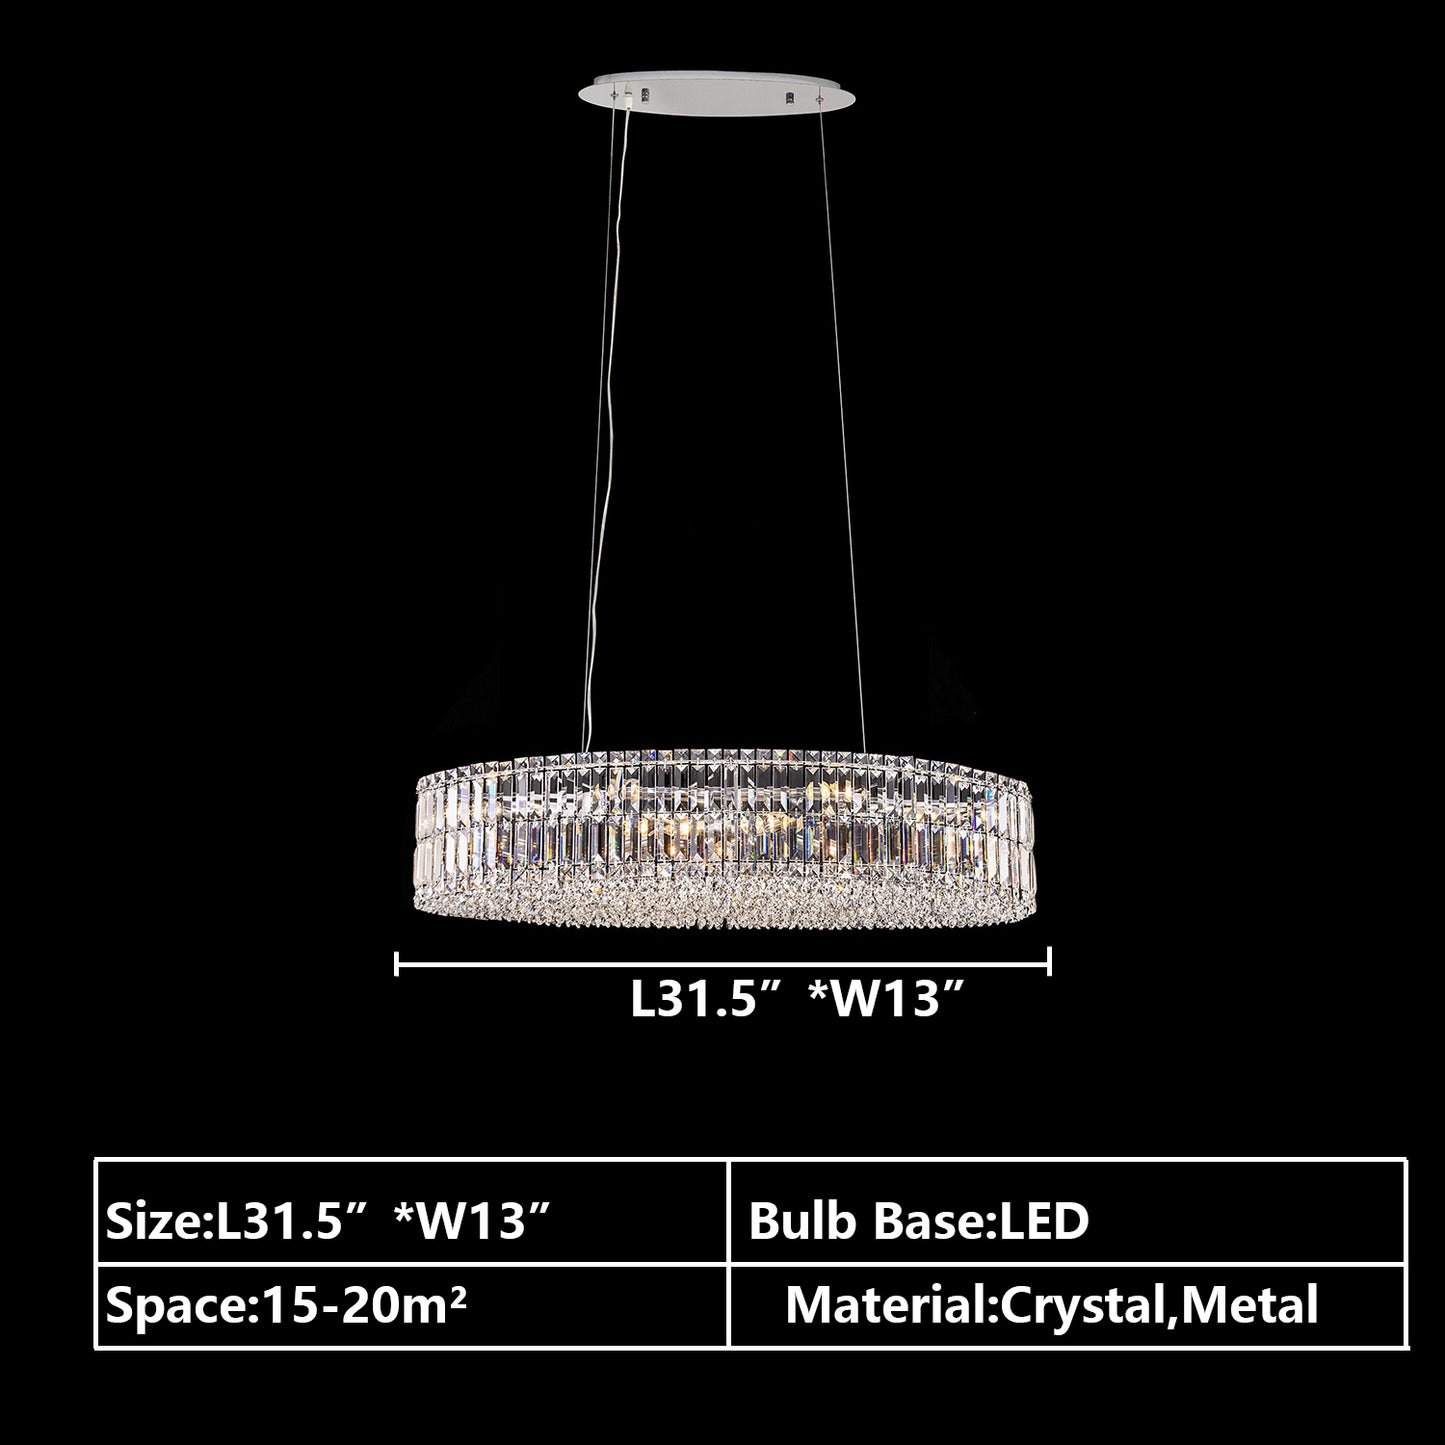 Oval:L31.5"*W13.0" chandelier,chandeliers,pendant,round,oval,ceiling,crystal,metal,chrome,silver,clear crystal,adjustable,chain,light luxury,luxury,living room,dining room,foyer,entrys,hallway,bathroom,bedroom,home office